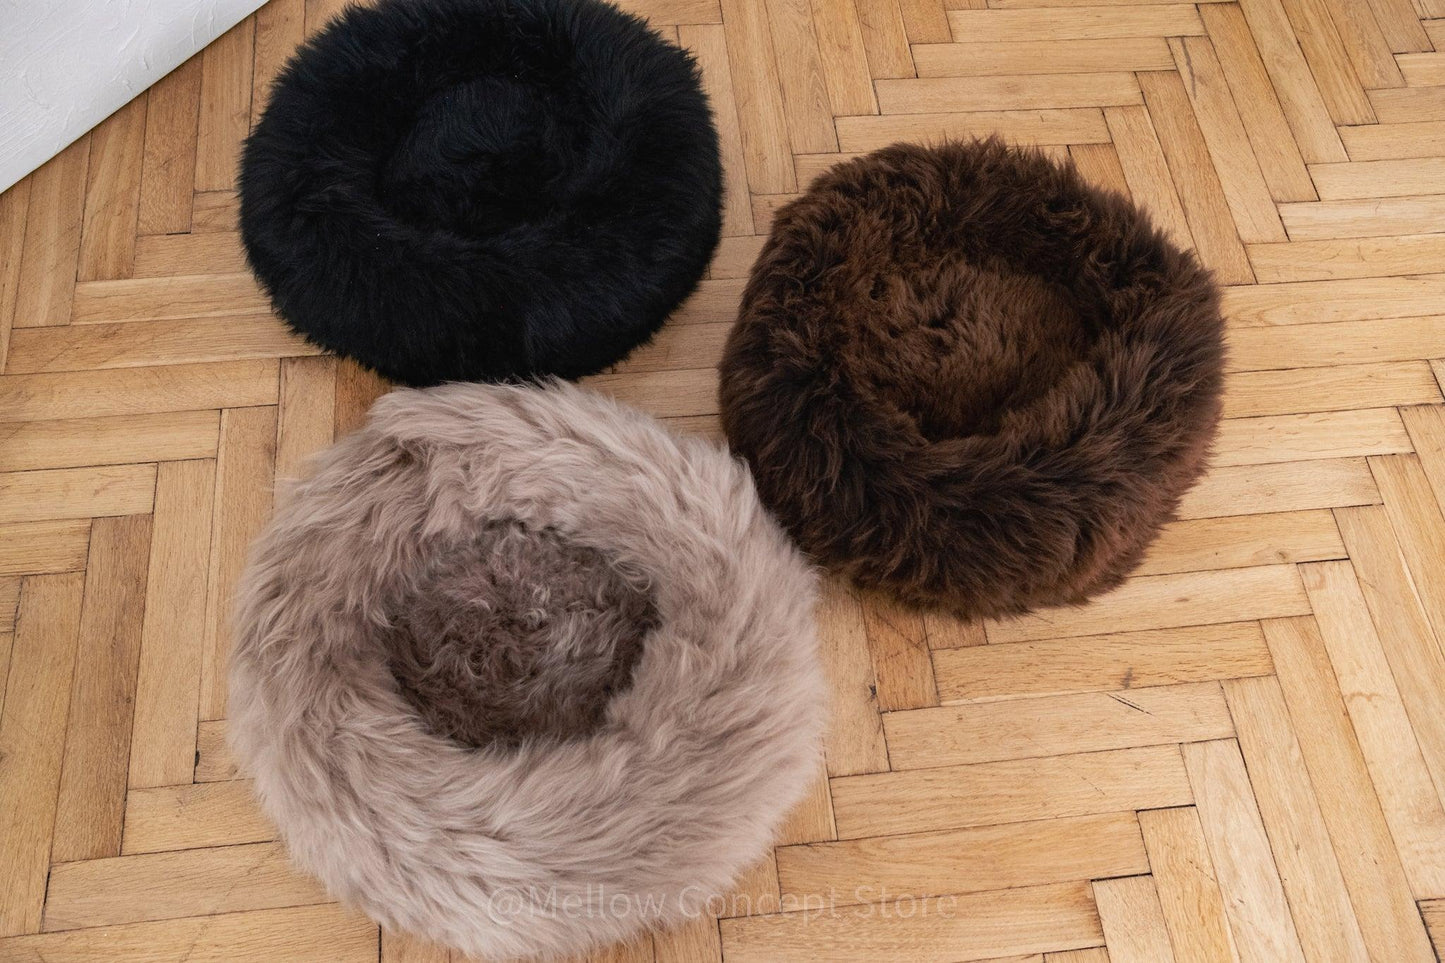 Three Round Natural Sheepskin Pet Beds - Brown from Mellow Pet Store on a wooden floor.